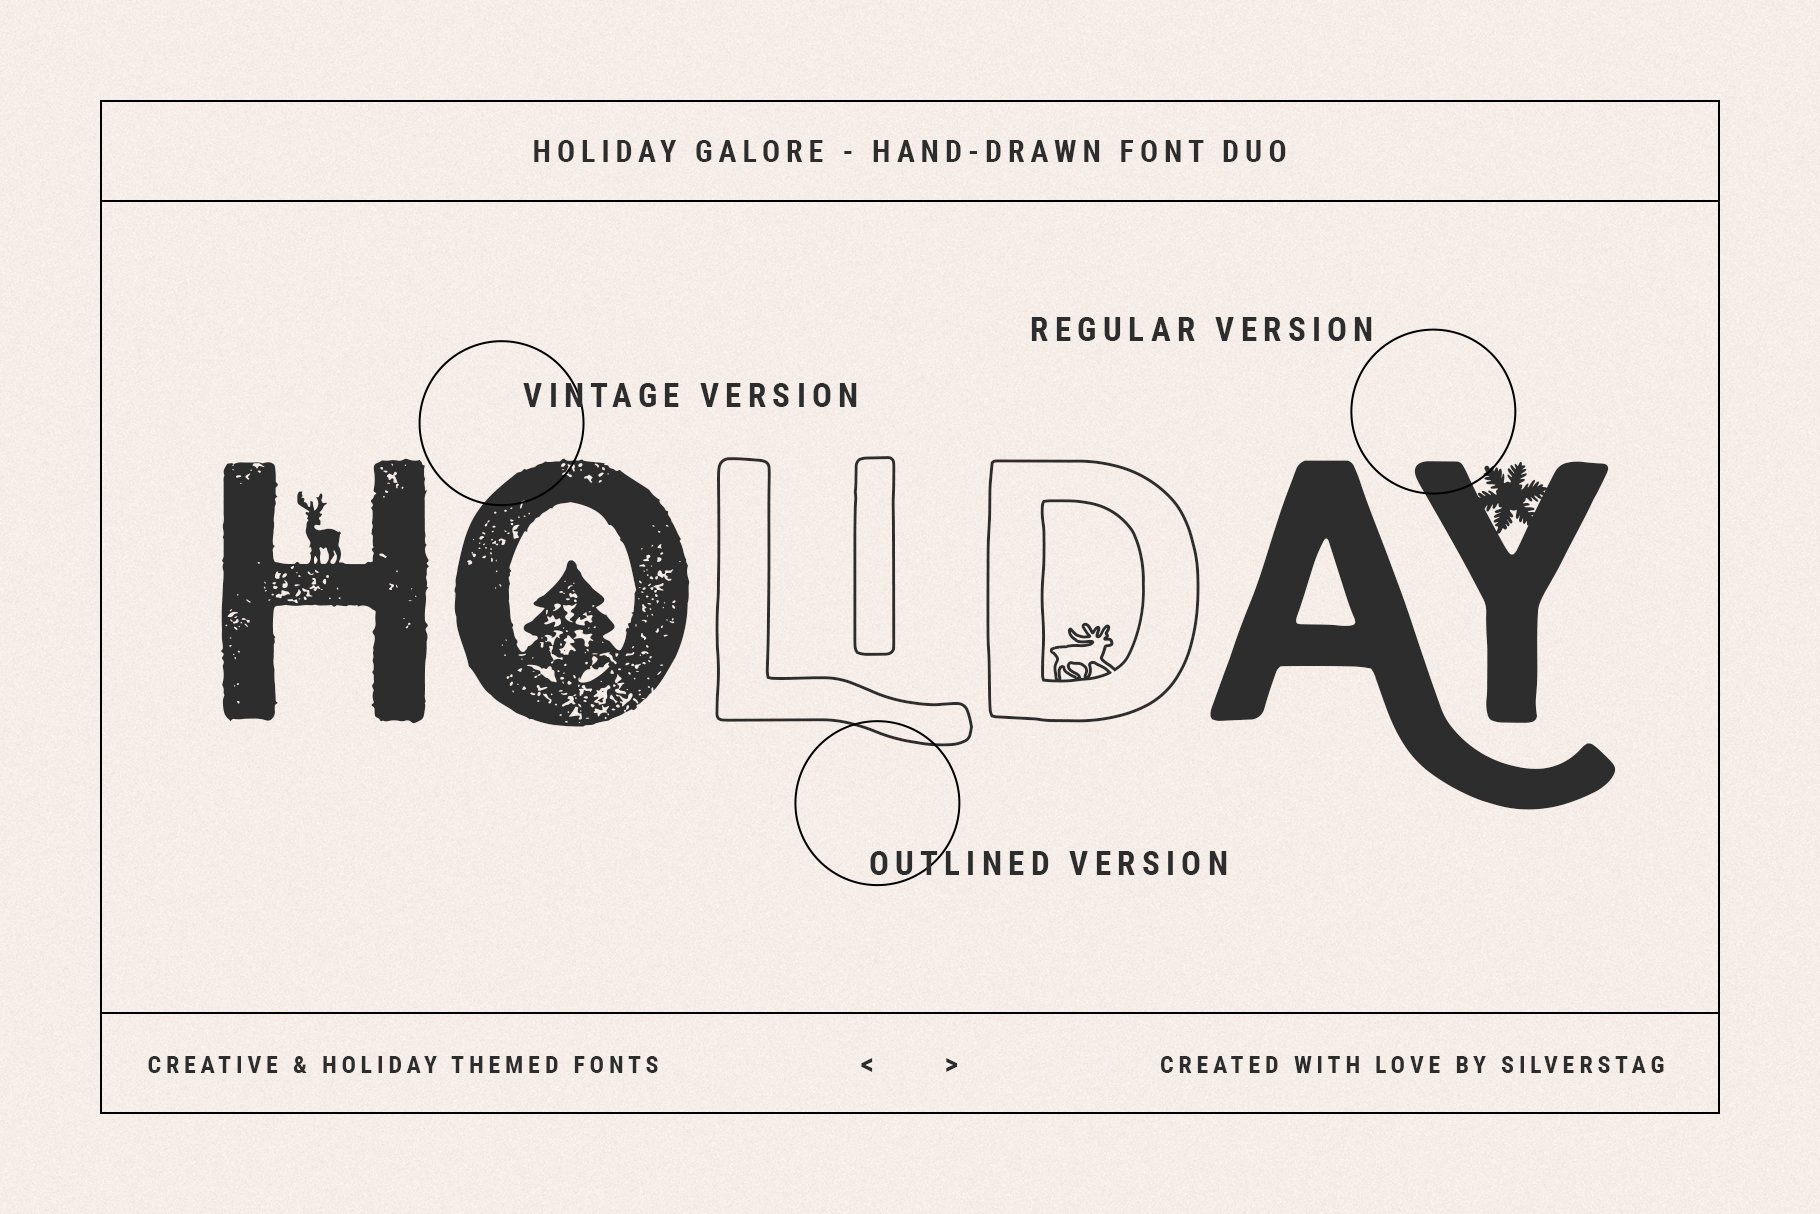 27 holiday galore font duo by silver stag 348